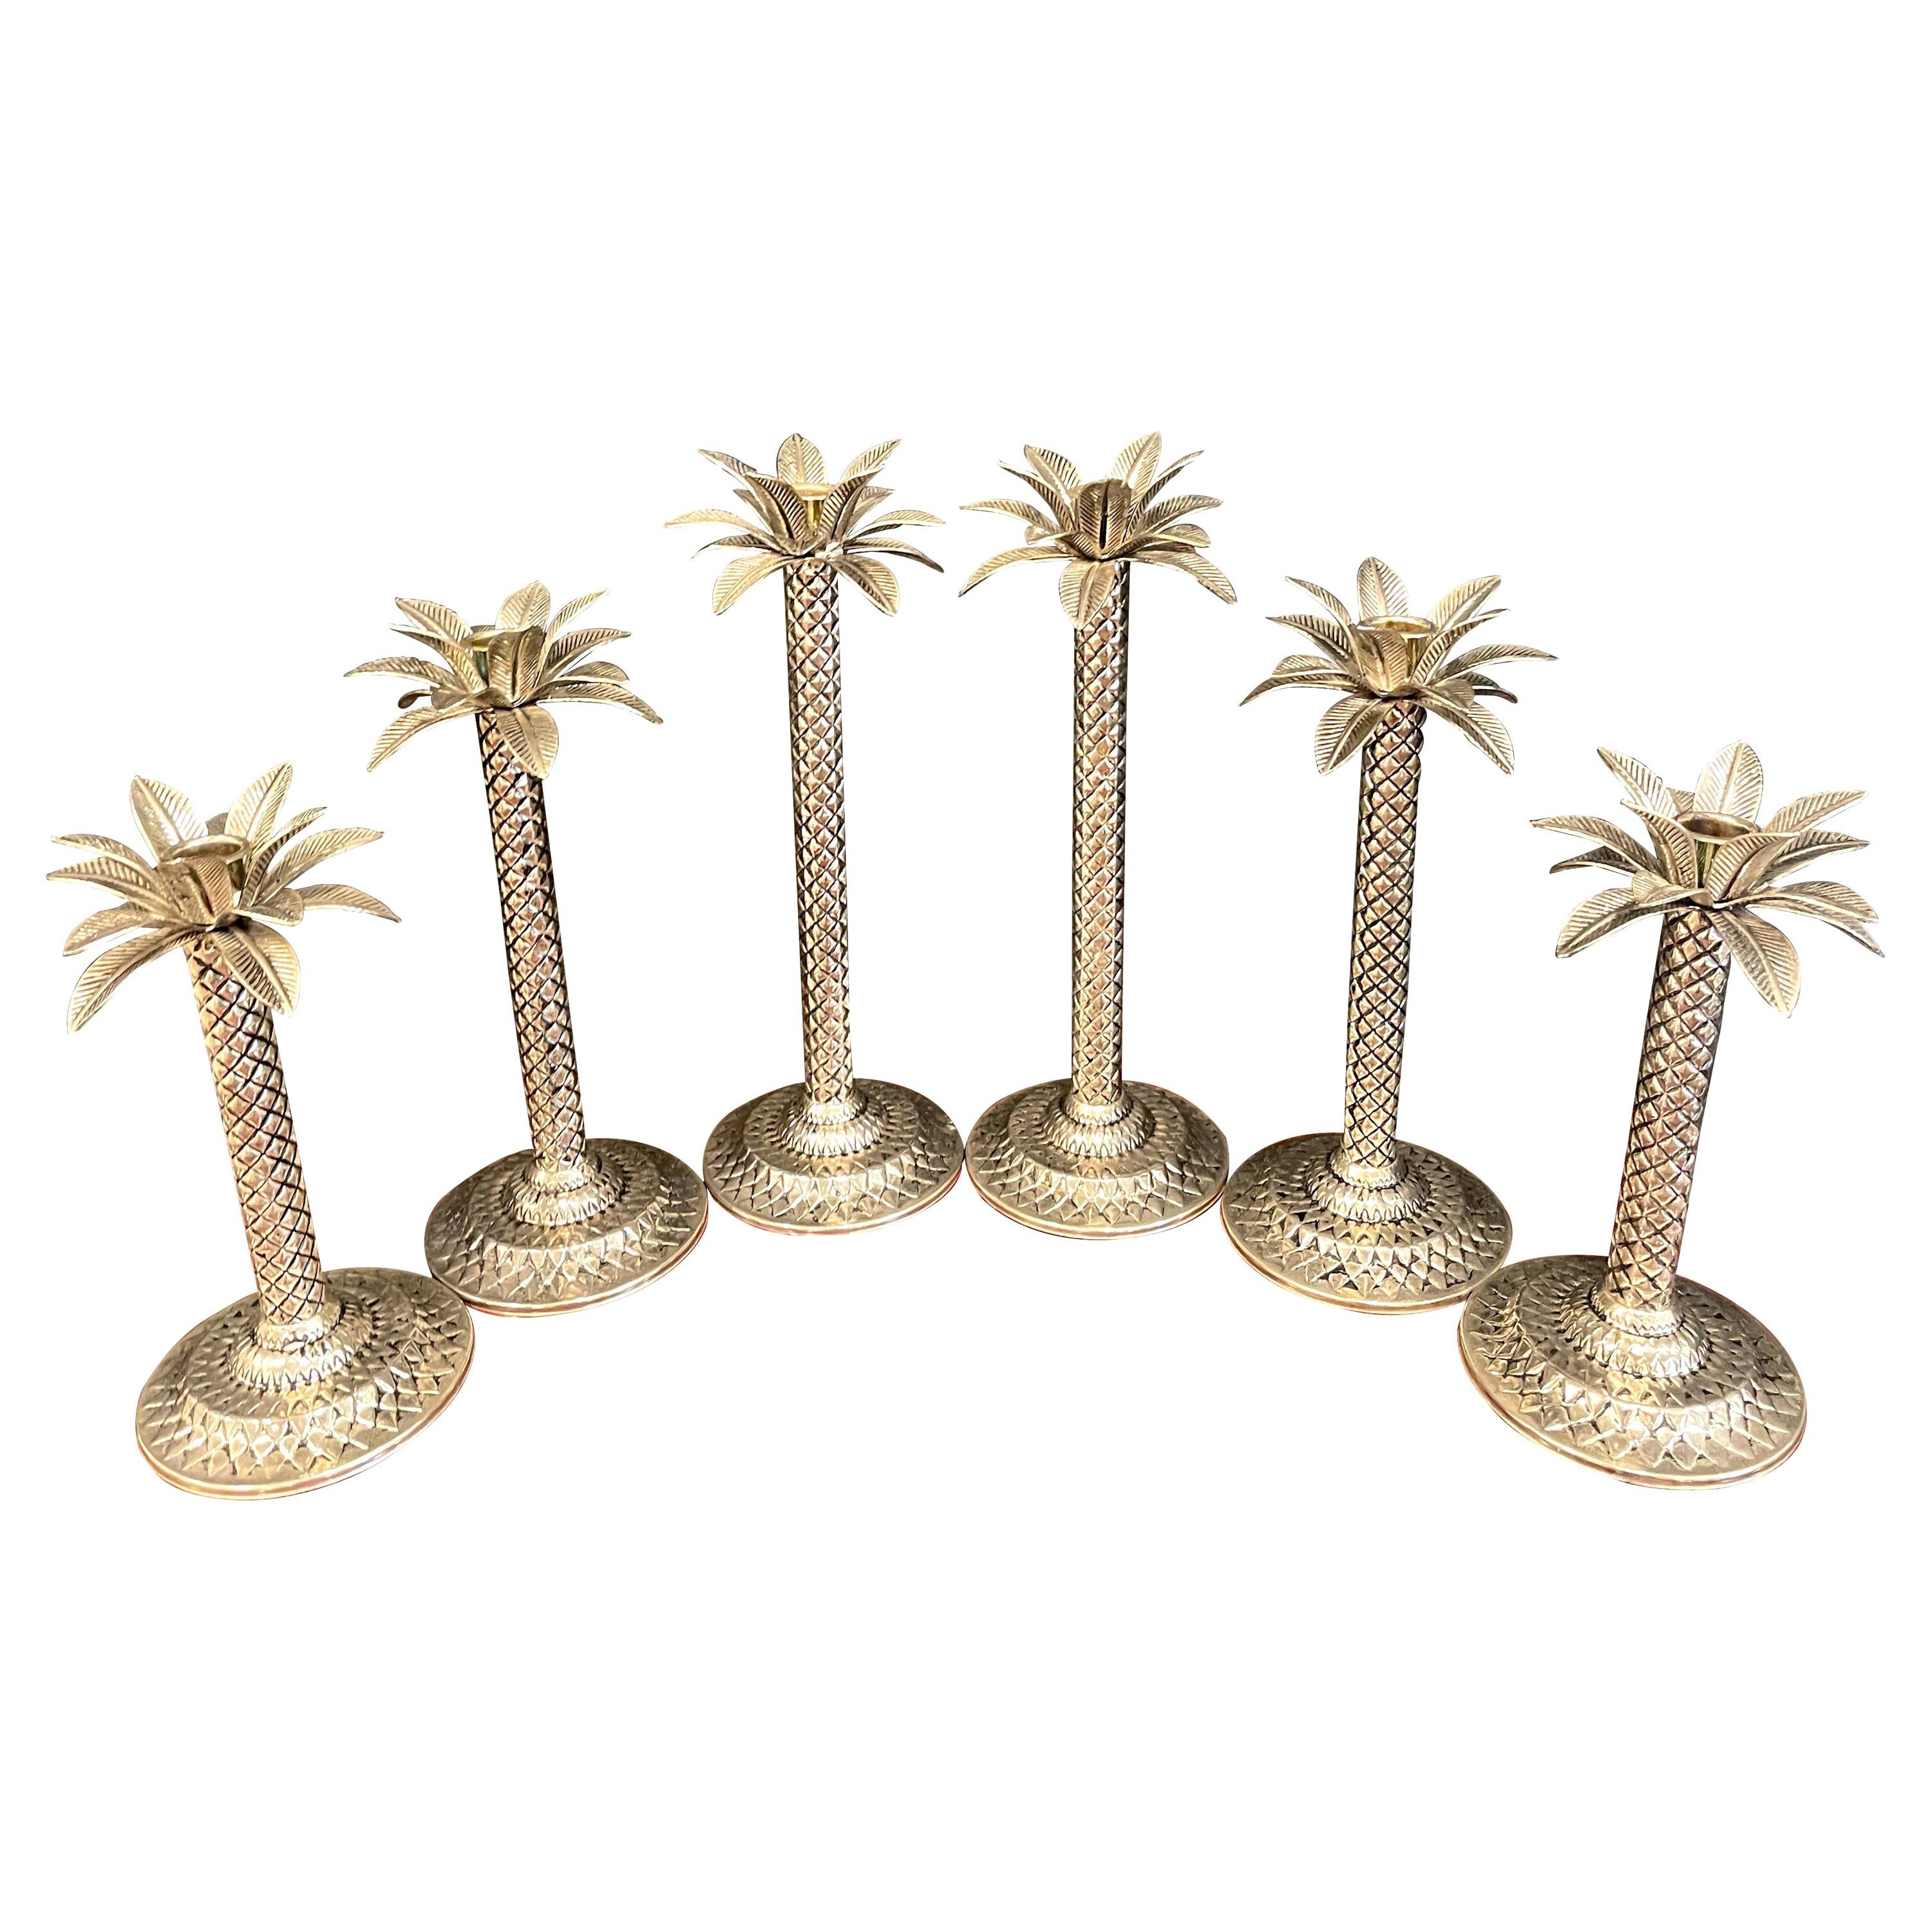 Six Hollywood Regency Style Silverplated Palm Tree Candlesticks For Sale